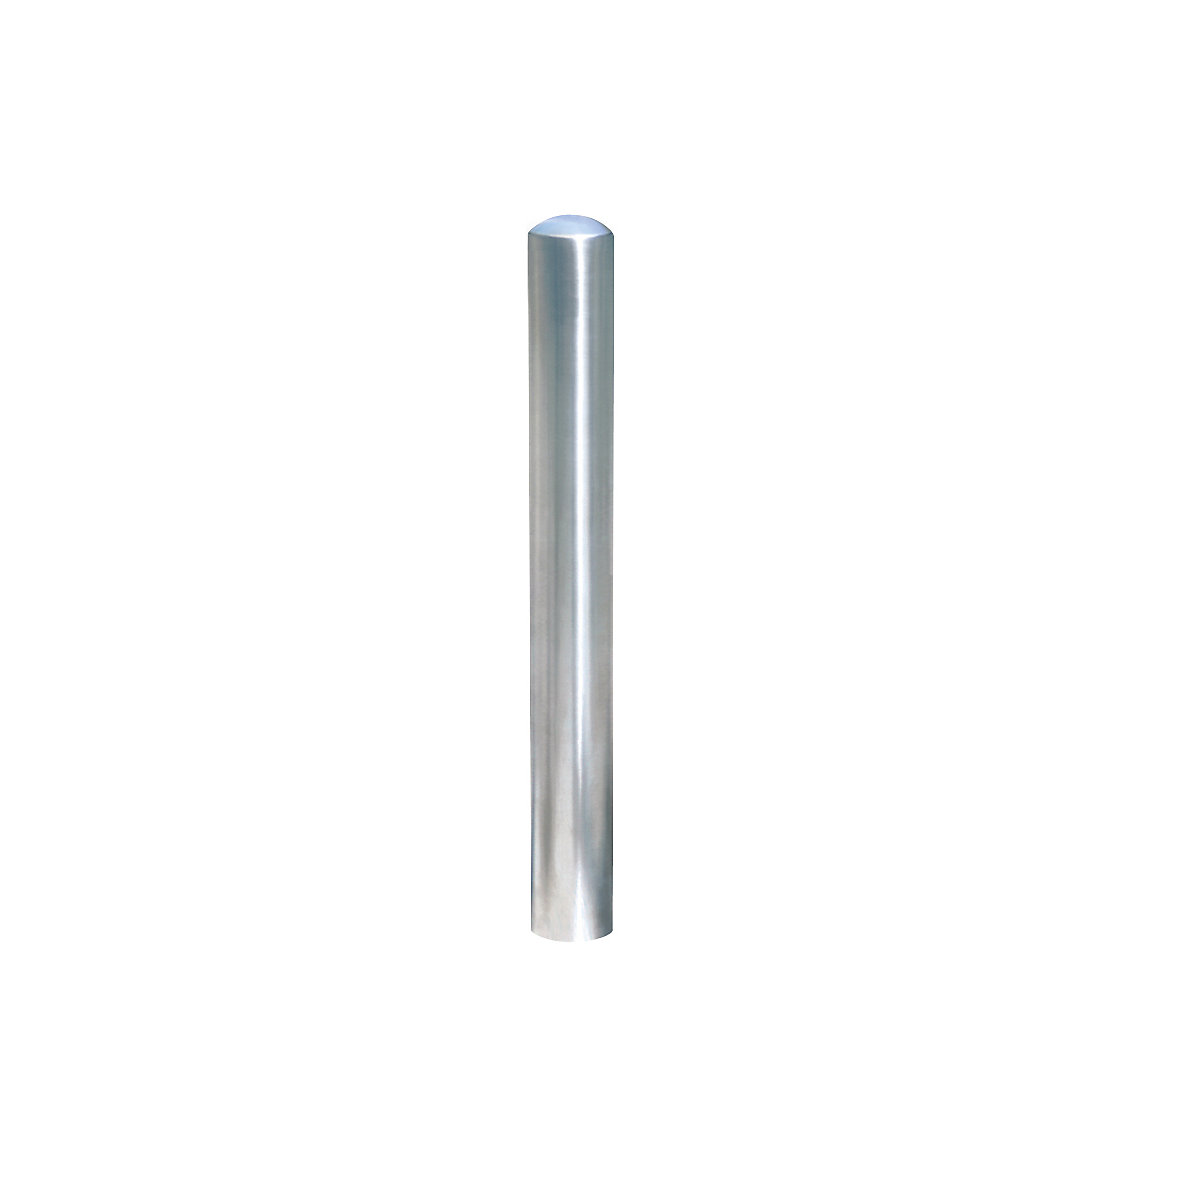 Stainless steel bollard, for concreting in, Ø 60 mm-4